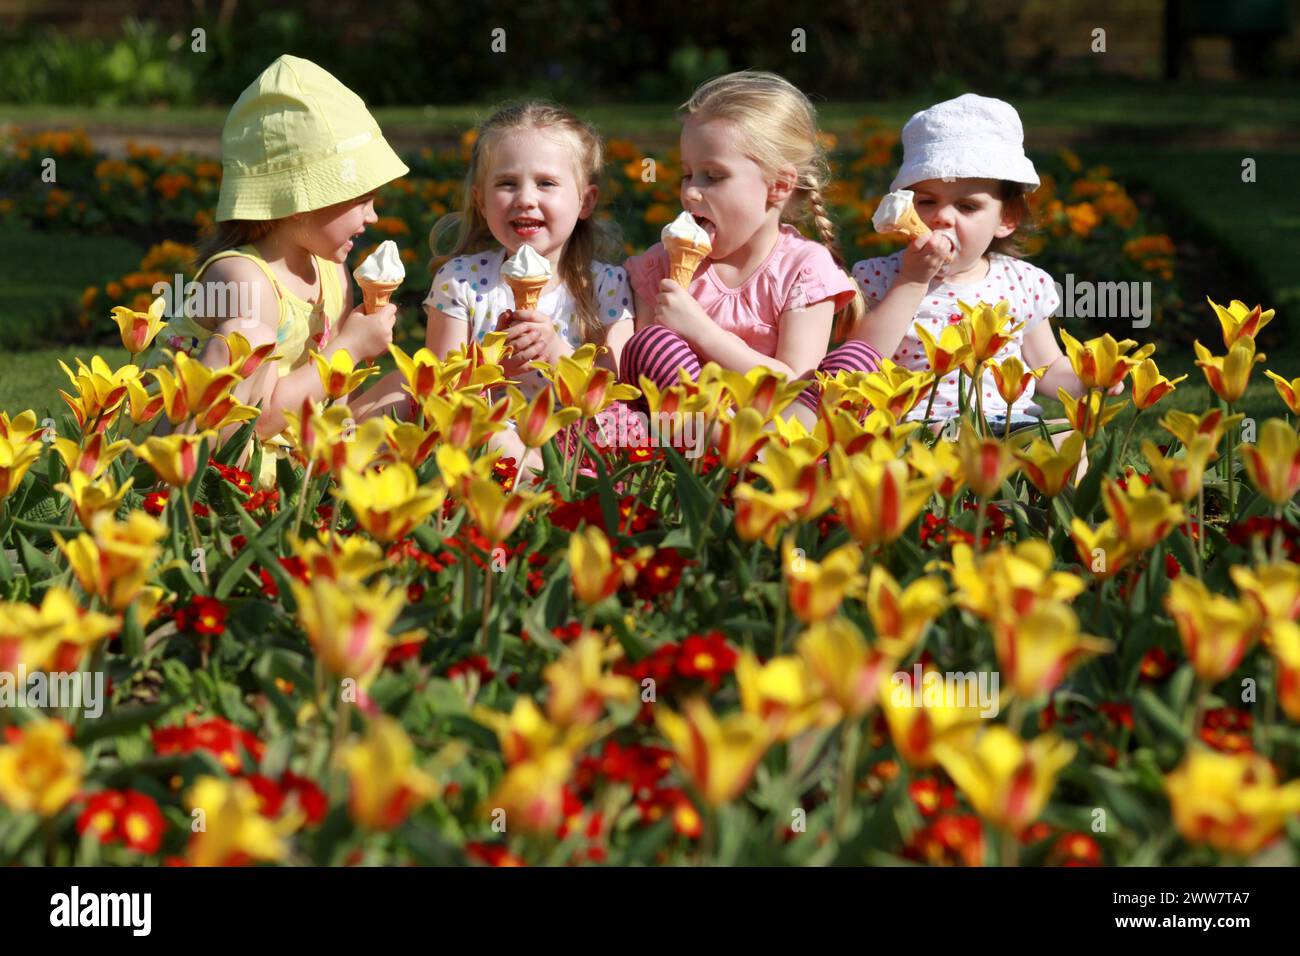 29/03/2012...As Britain continues to enjoy high temperatures, pals (L/R:) Amelia, 4, Lotta, 2, Isla, 4, and India, 2,  cool off with ice creams by tul Stock Photo